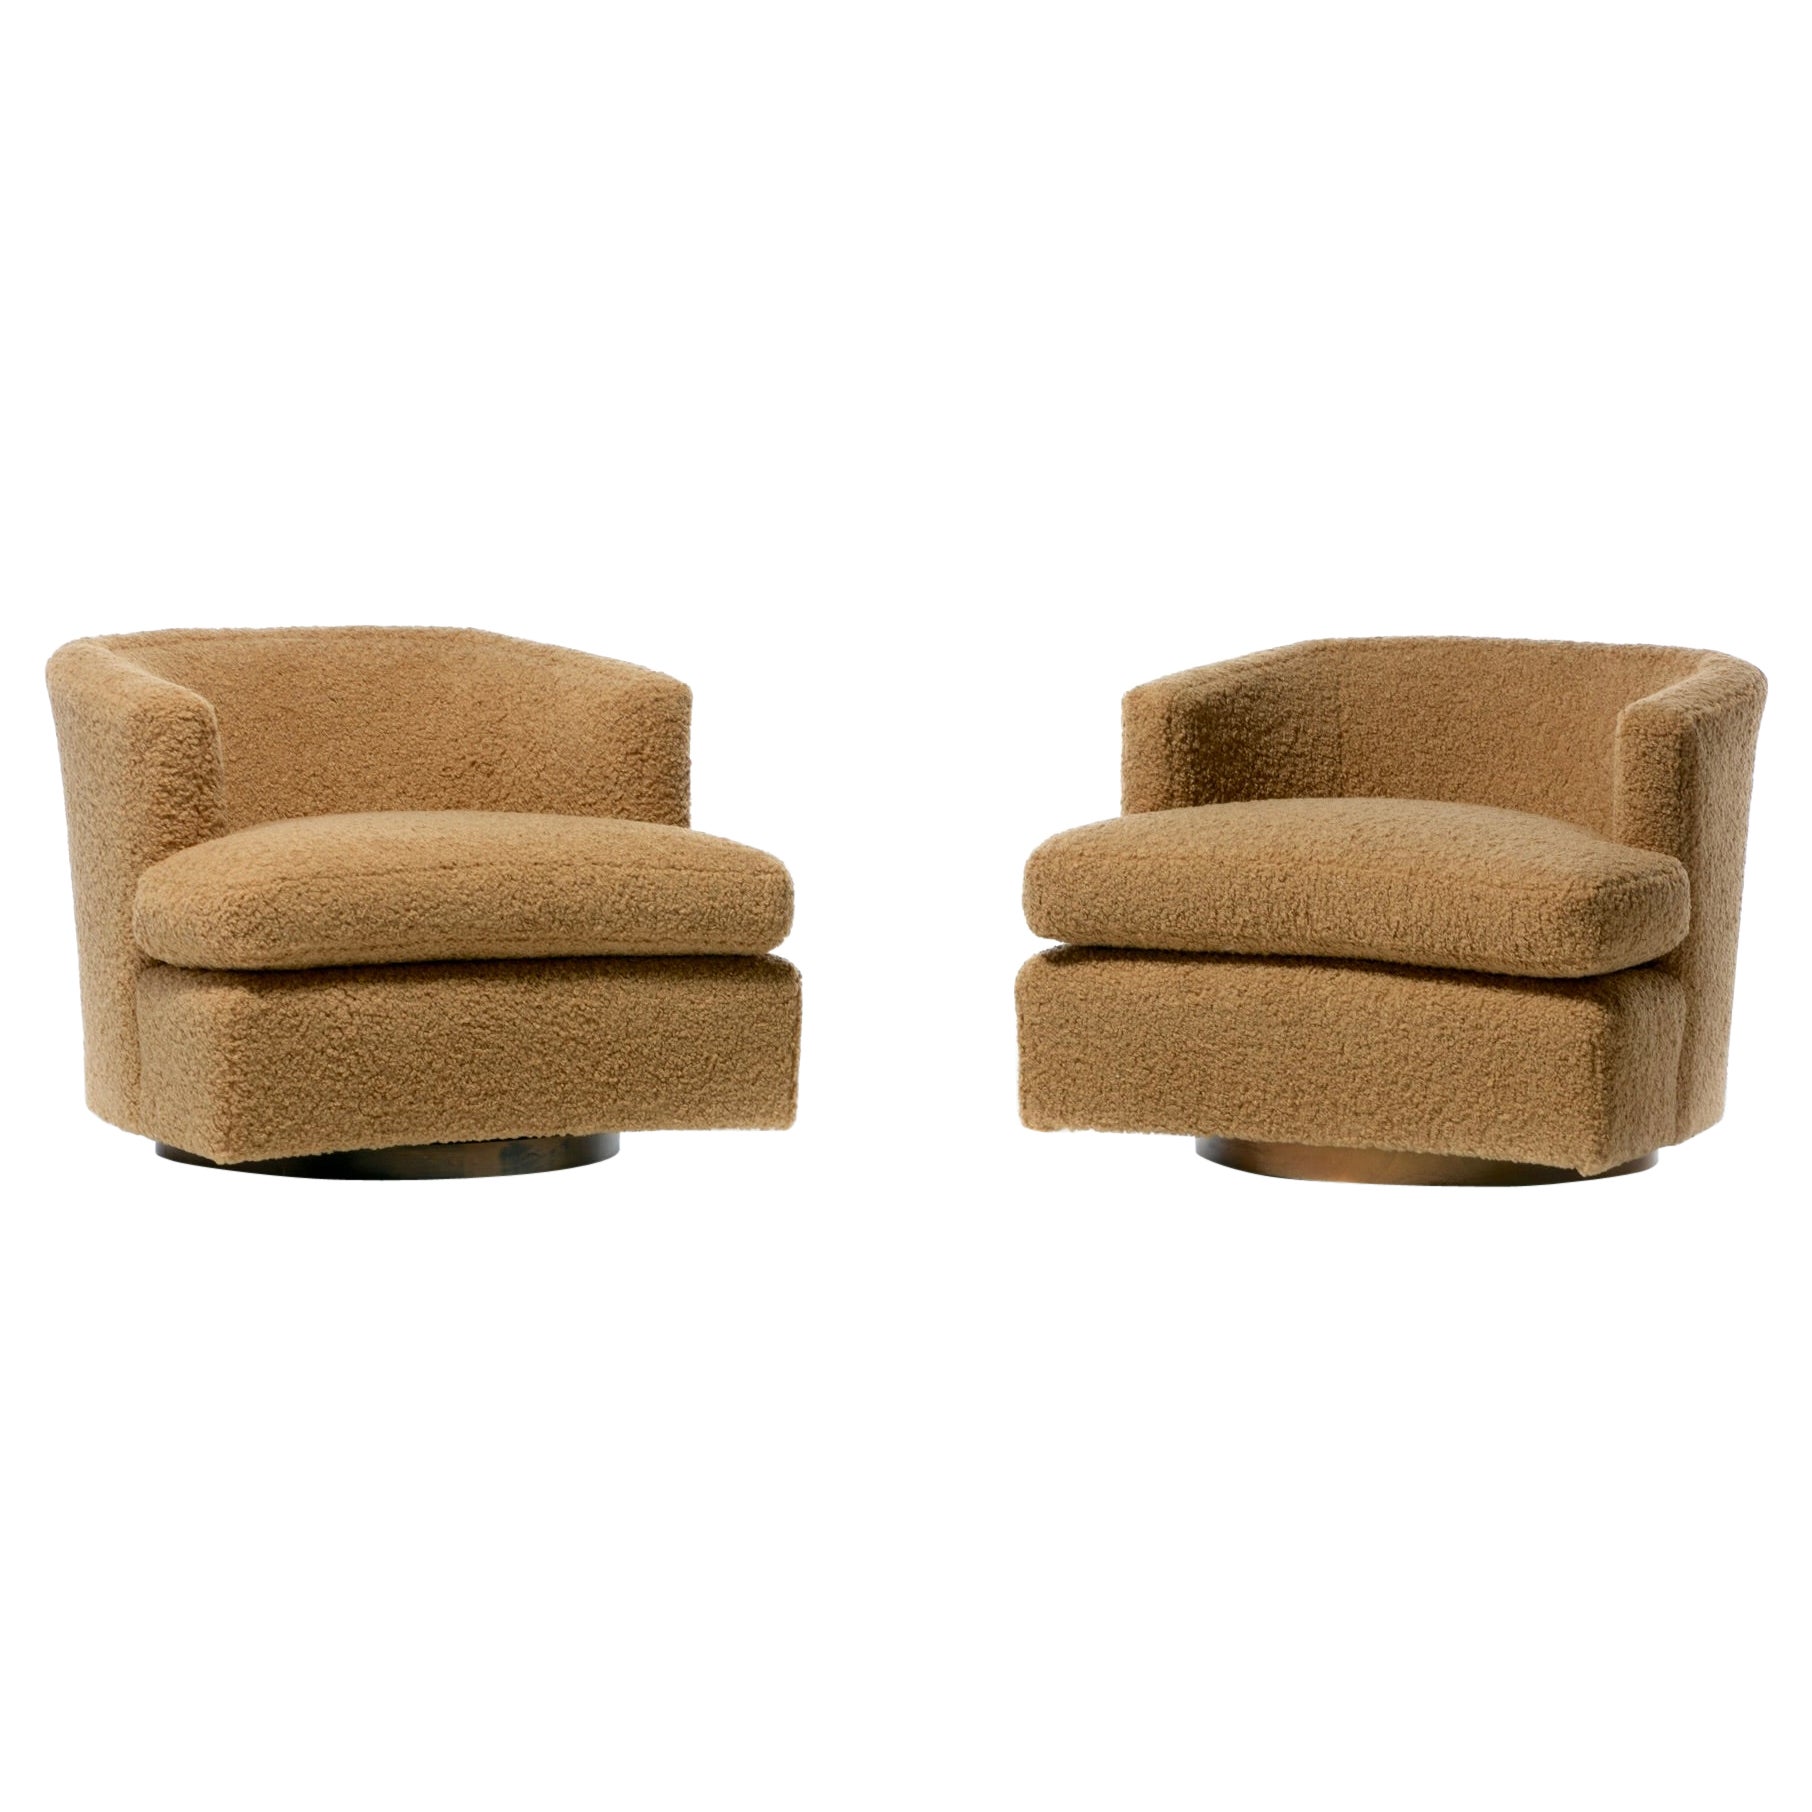 Harvey Probber Swivel Lounge Chairs Upholstered in Camel Teddy Bear C. 1955